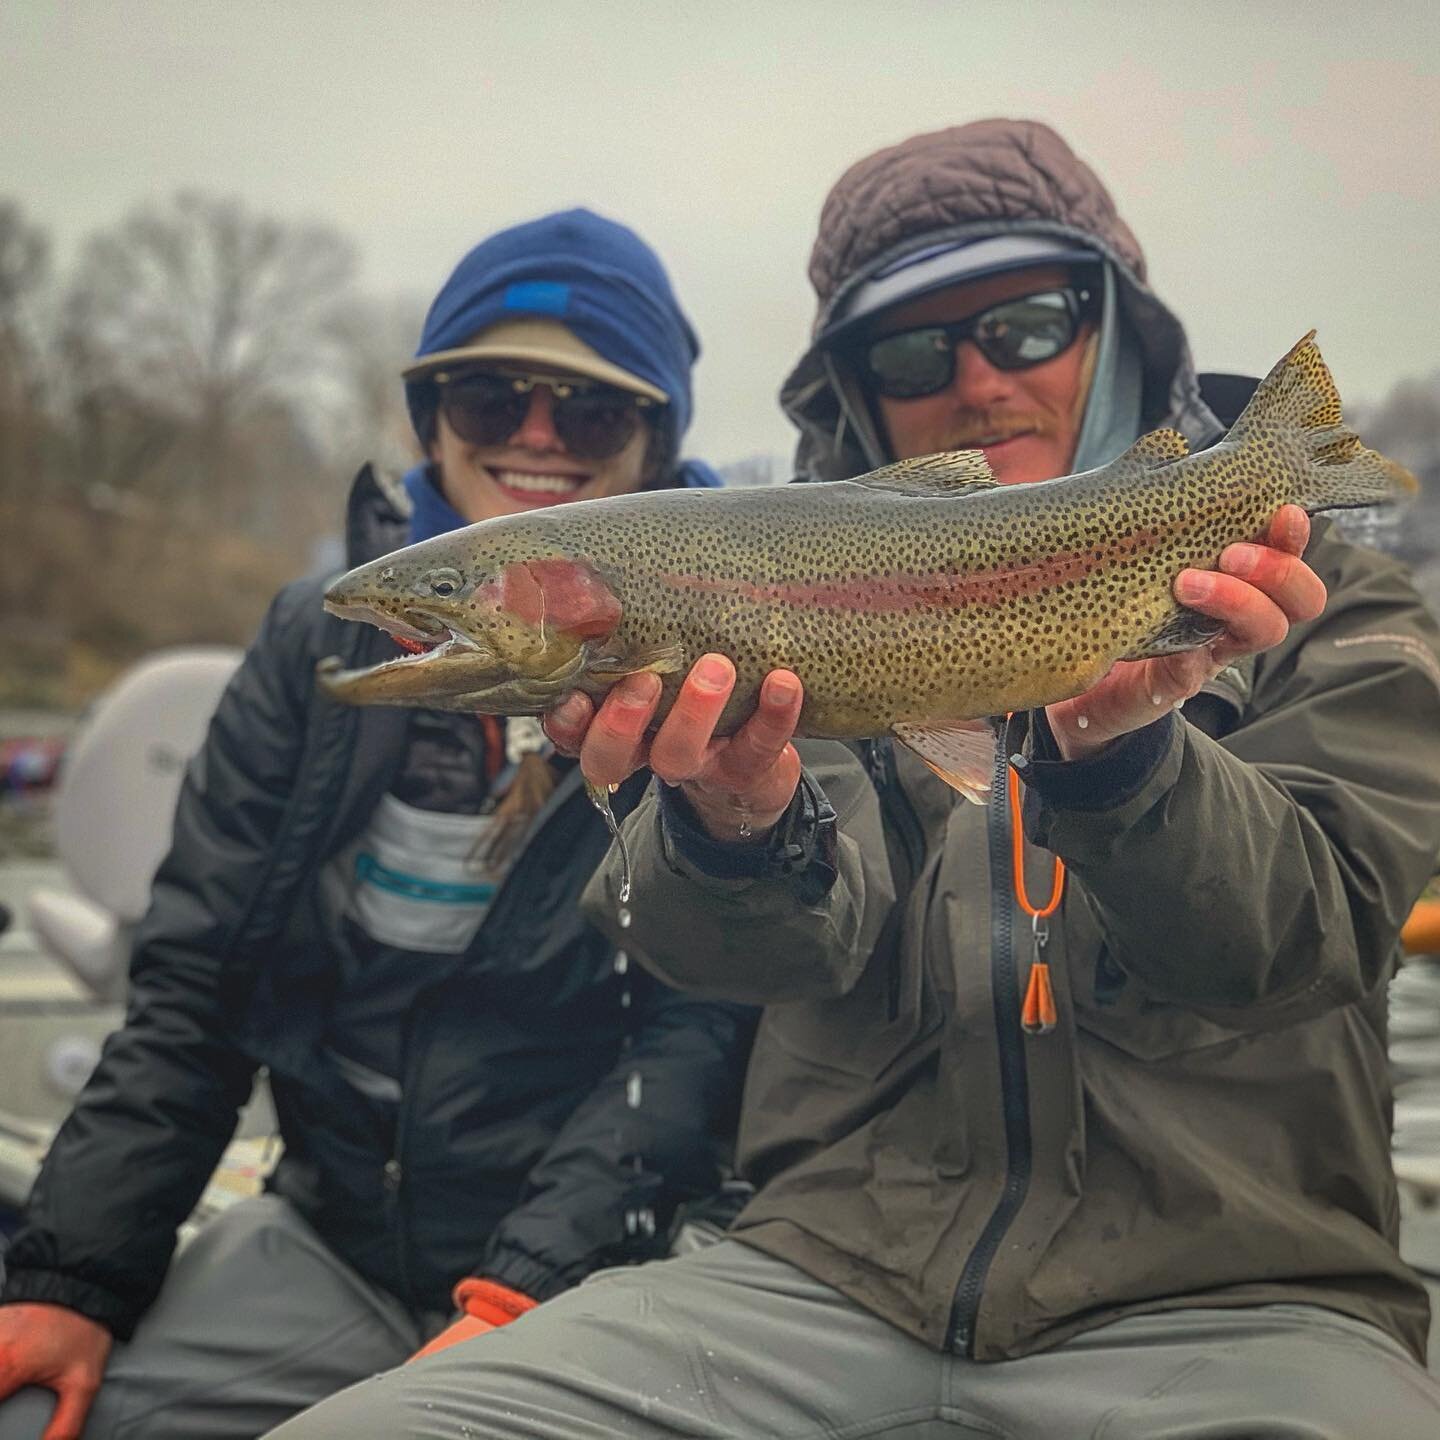 I can&rsquo;t believe it&rsquo;s not butter! Quality rainbows to end yesterday&rsquo;s outing!
&bull;
&bull;
&bull;
#riffletripoutfitters #scottflyrods #rossreels #flyfishtexas #whiteriver #arkansas #flyfish #flyfishing #flyfisharkansas #optoutside #